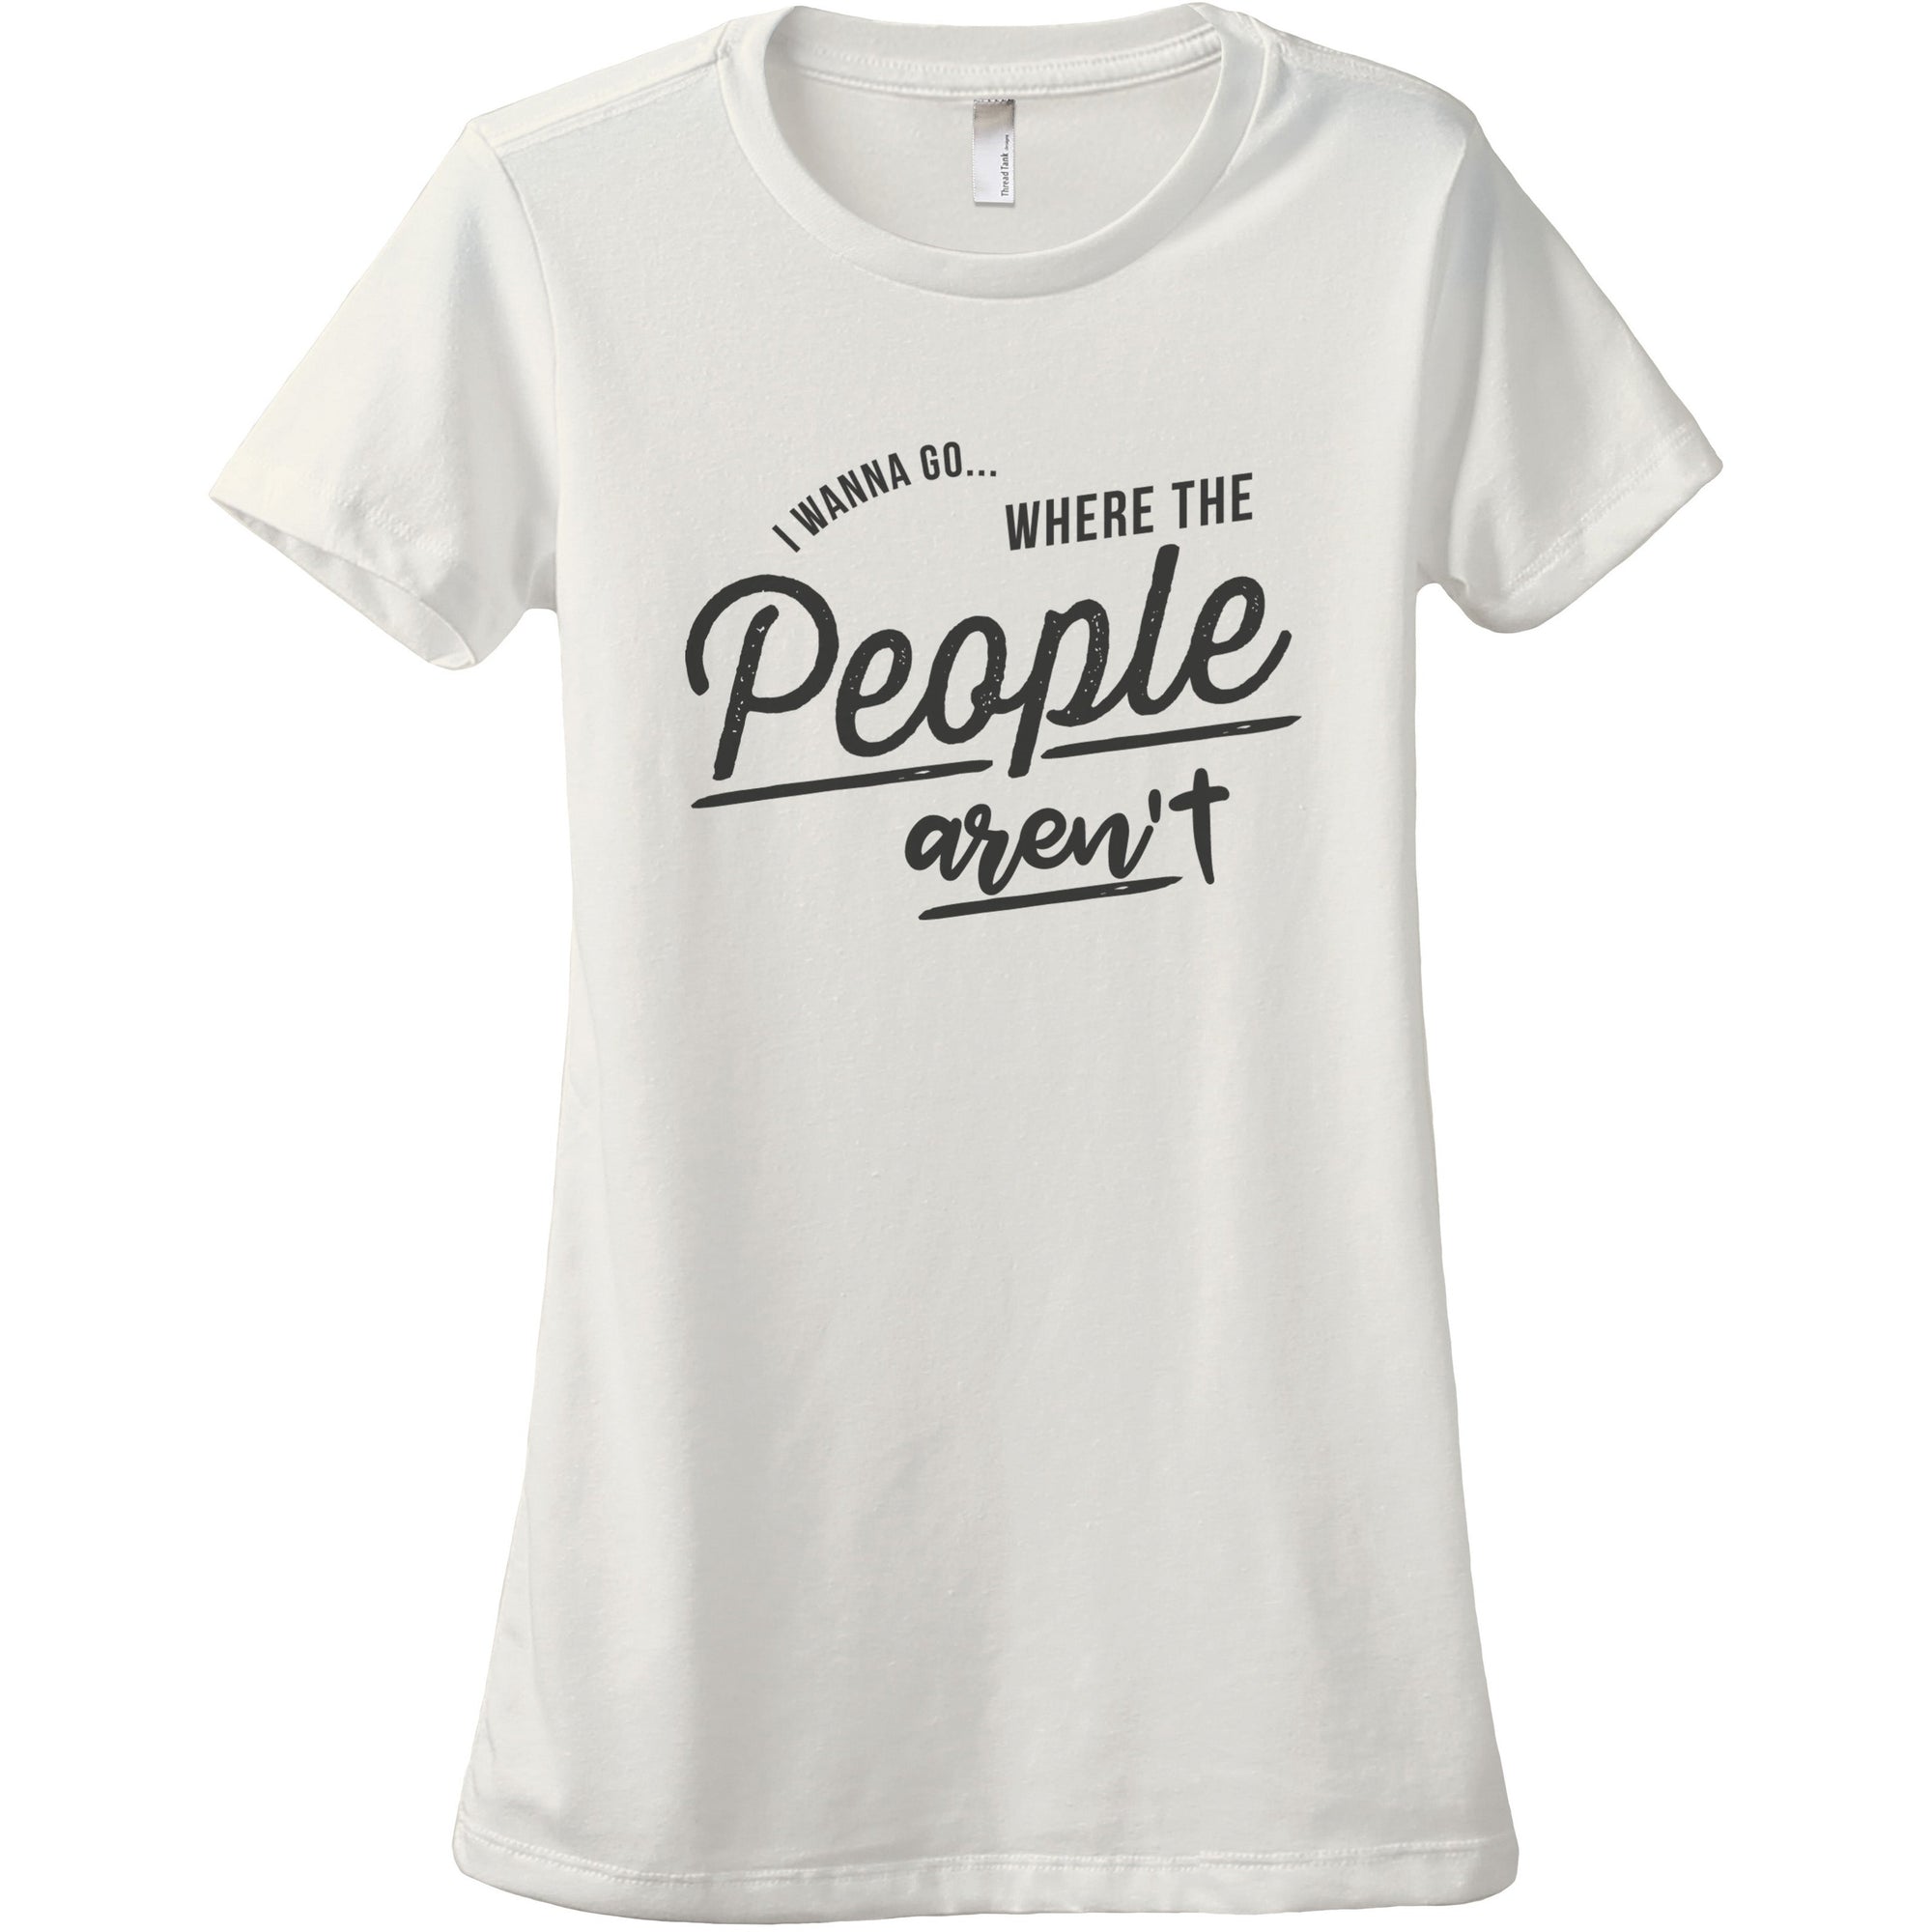 5. I Wanna Go Where The People Aren't - Stories You Can Wear by Thread Tank